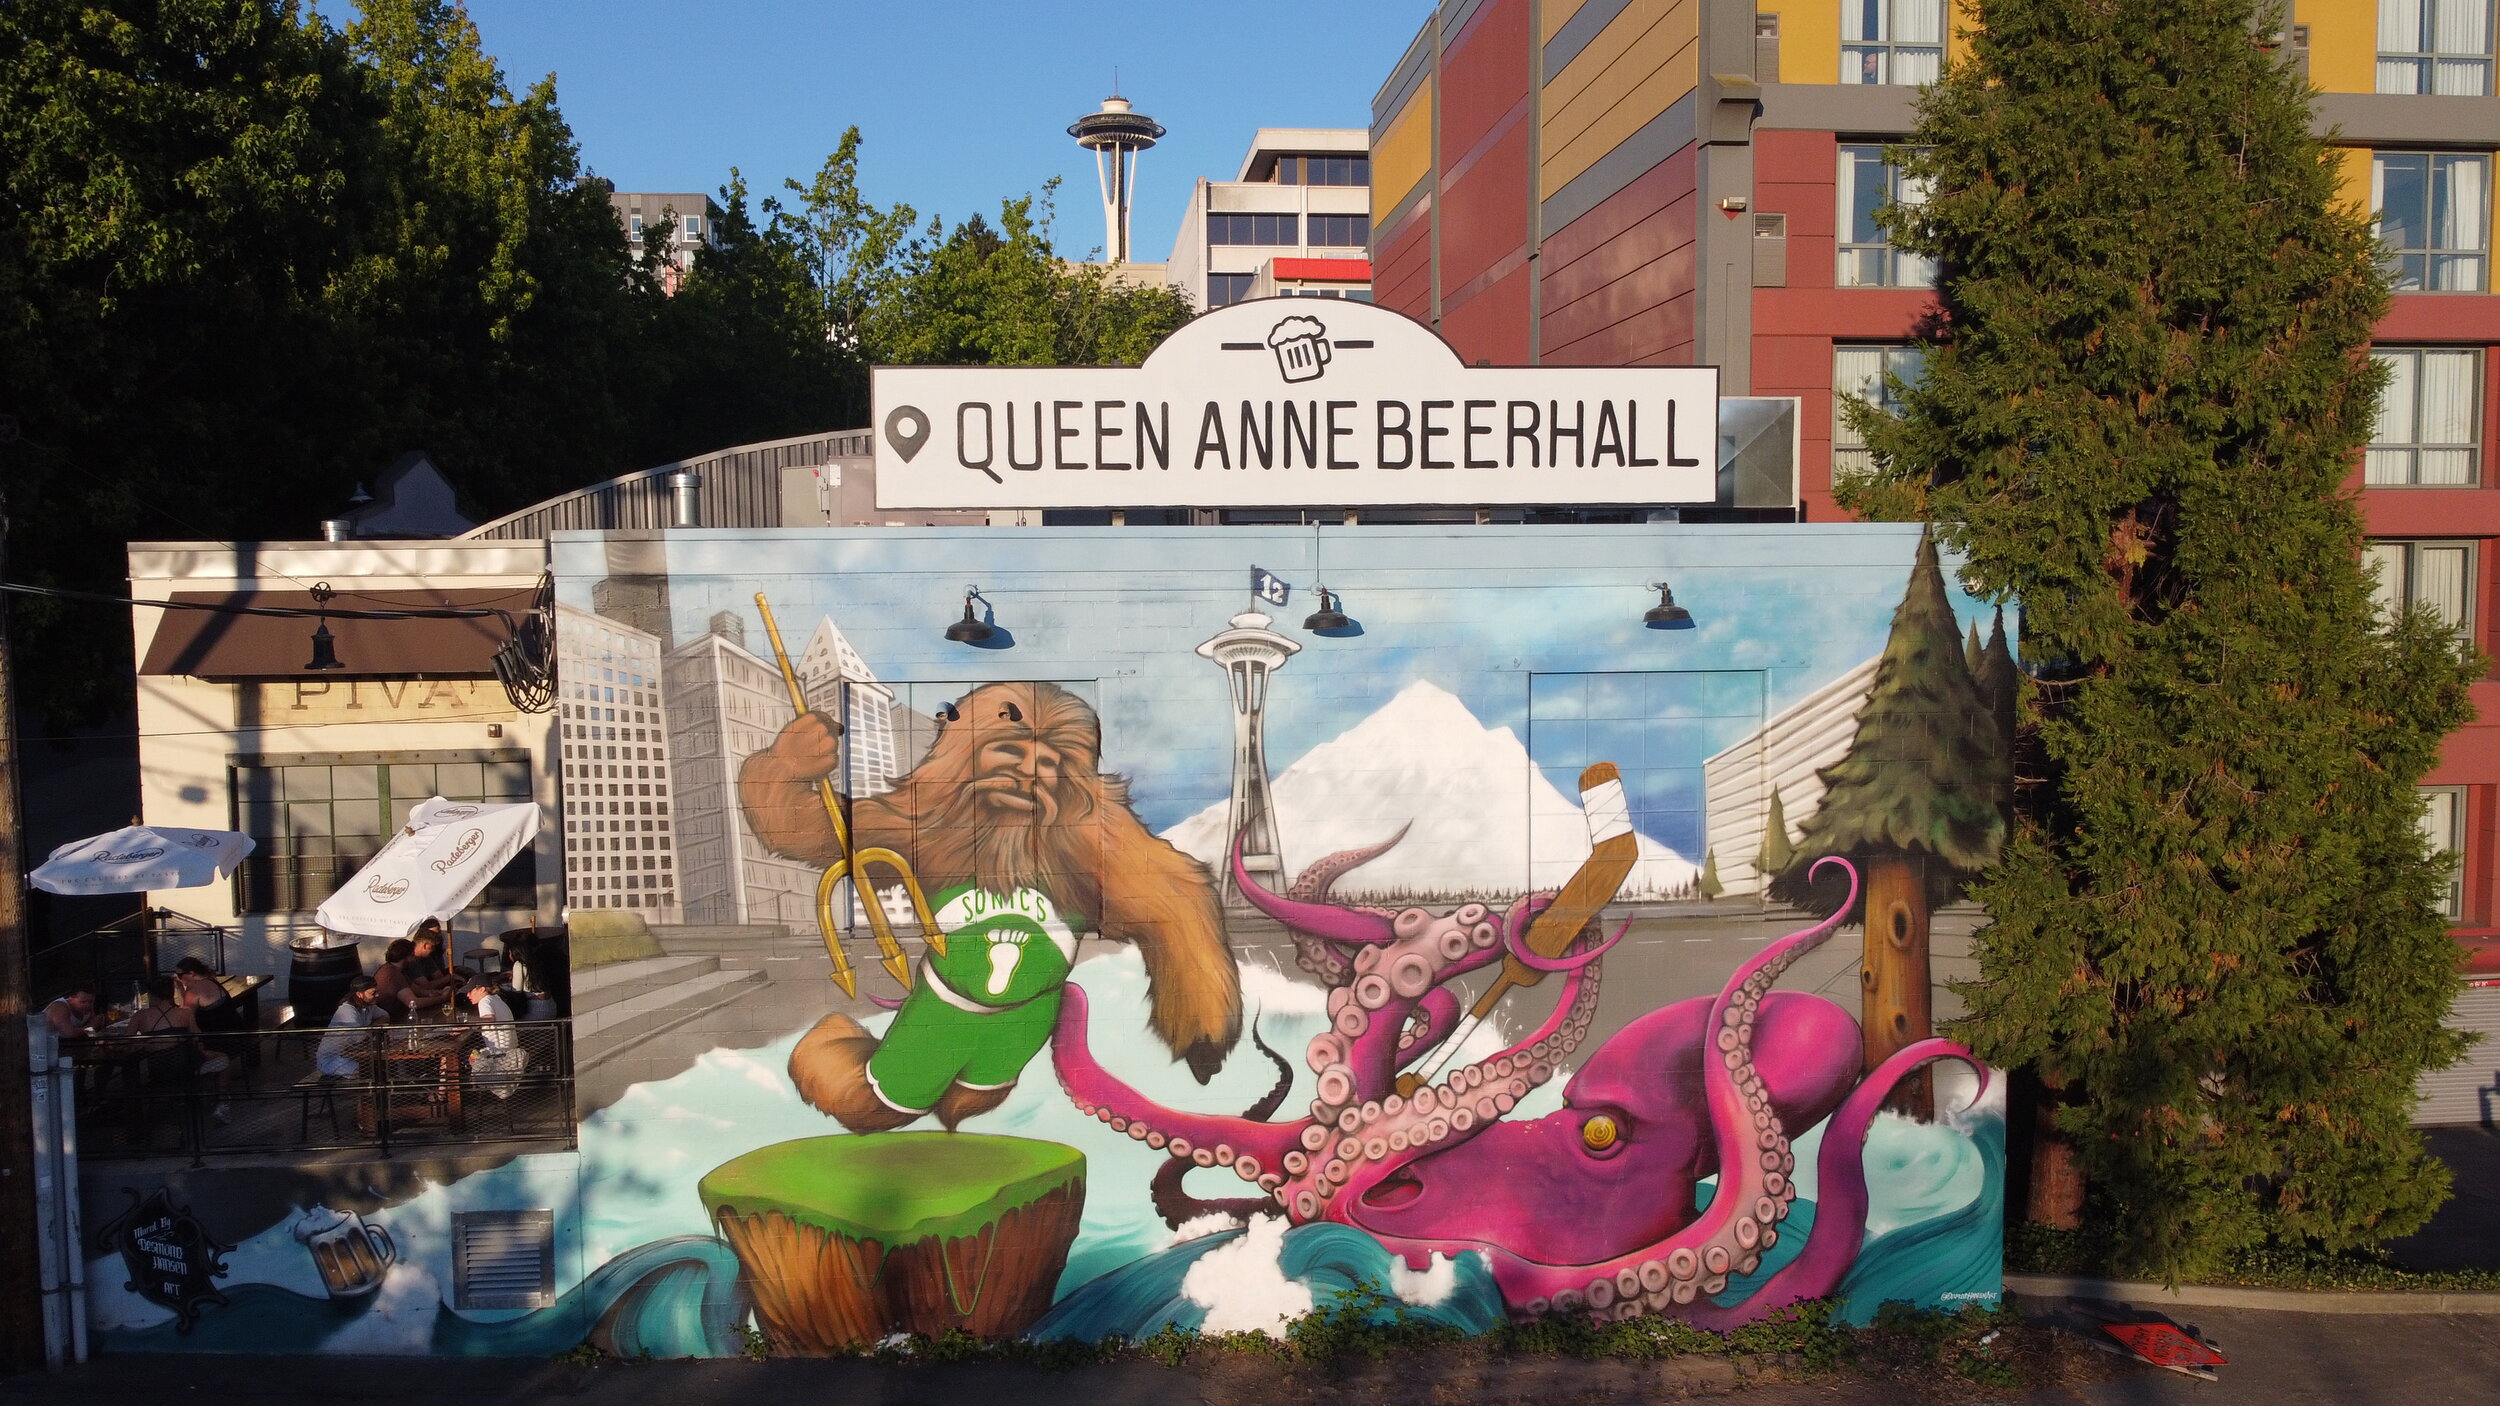 A mural on the exterior of Queen Anne Beerhall depicts Sasquatch attacking a kraken. Above it is the restaurant’s sign. To the left side, patio seating is visible.